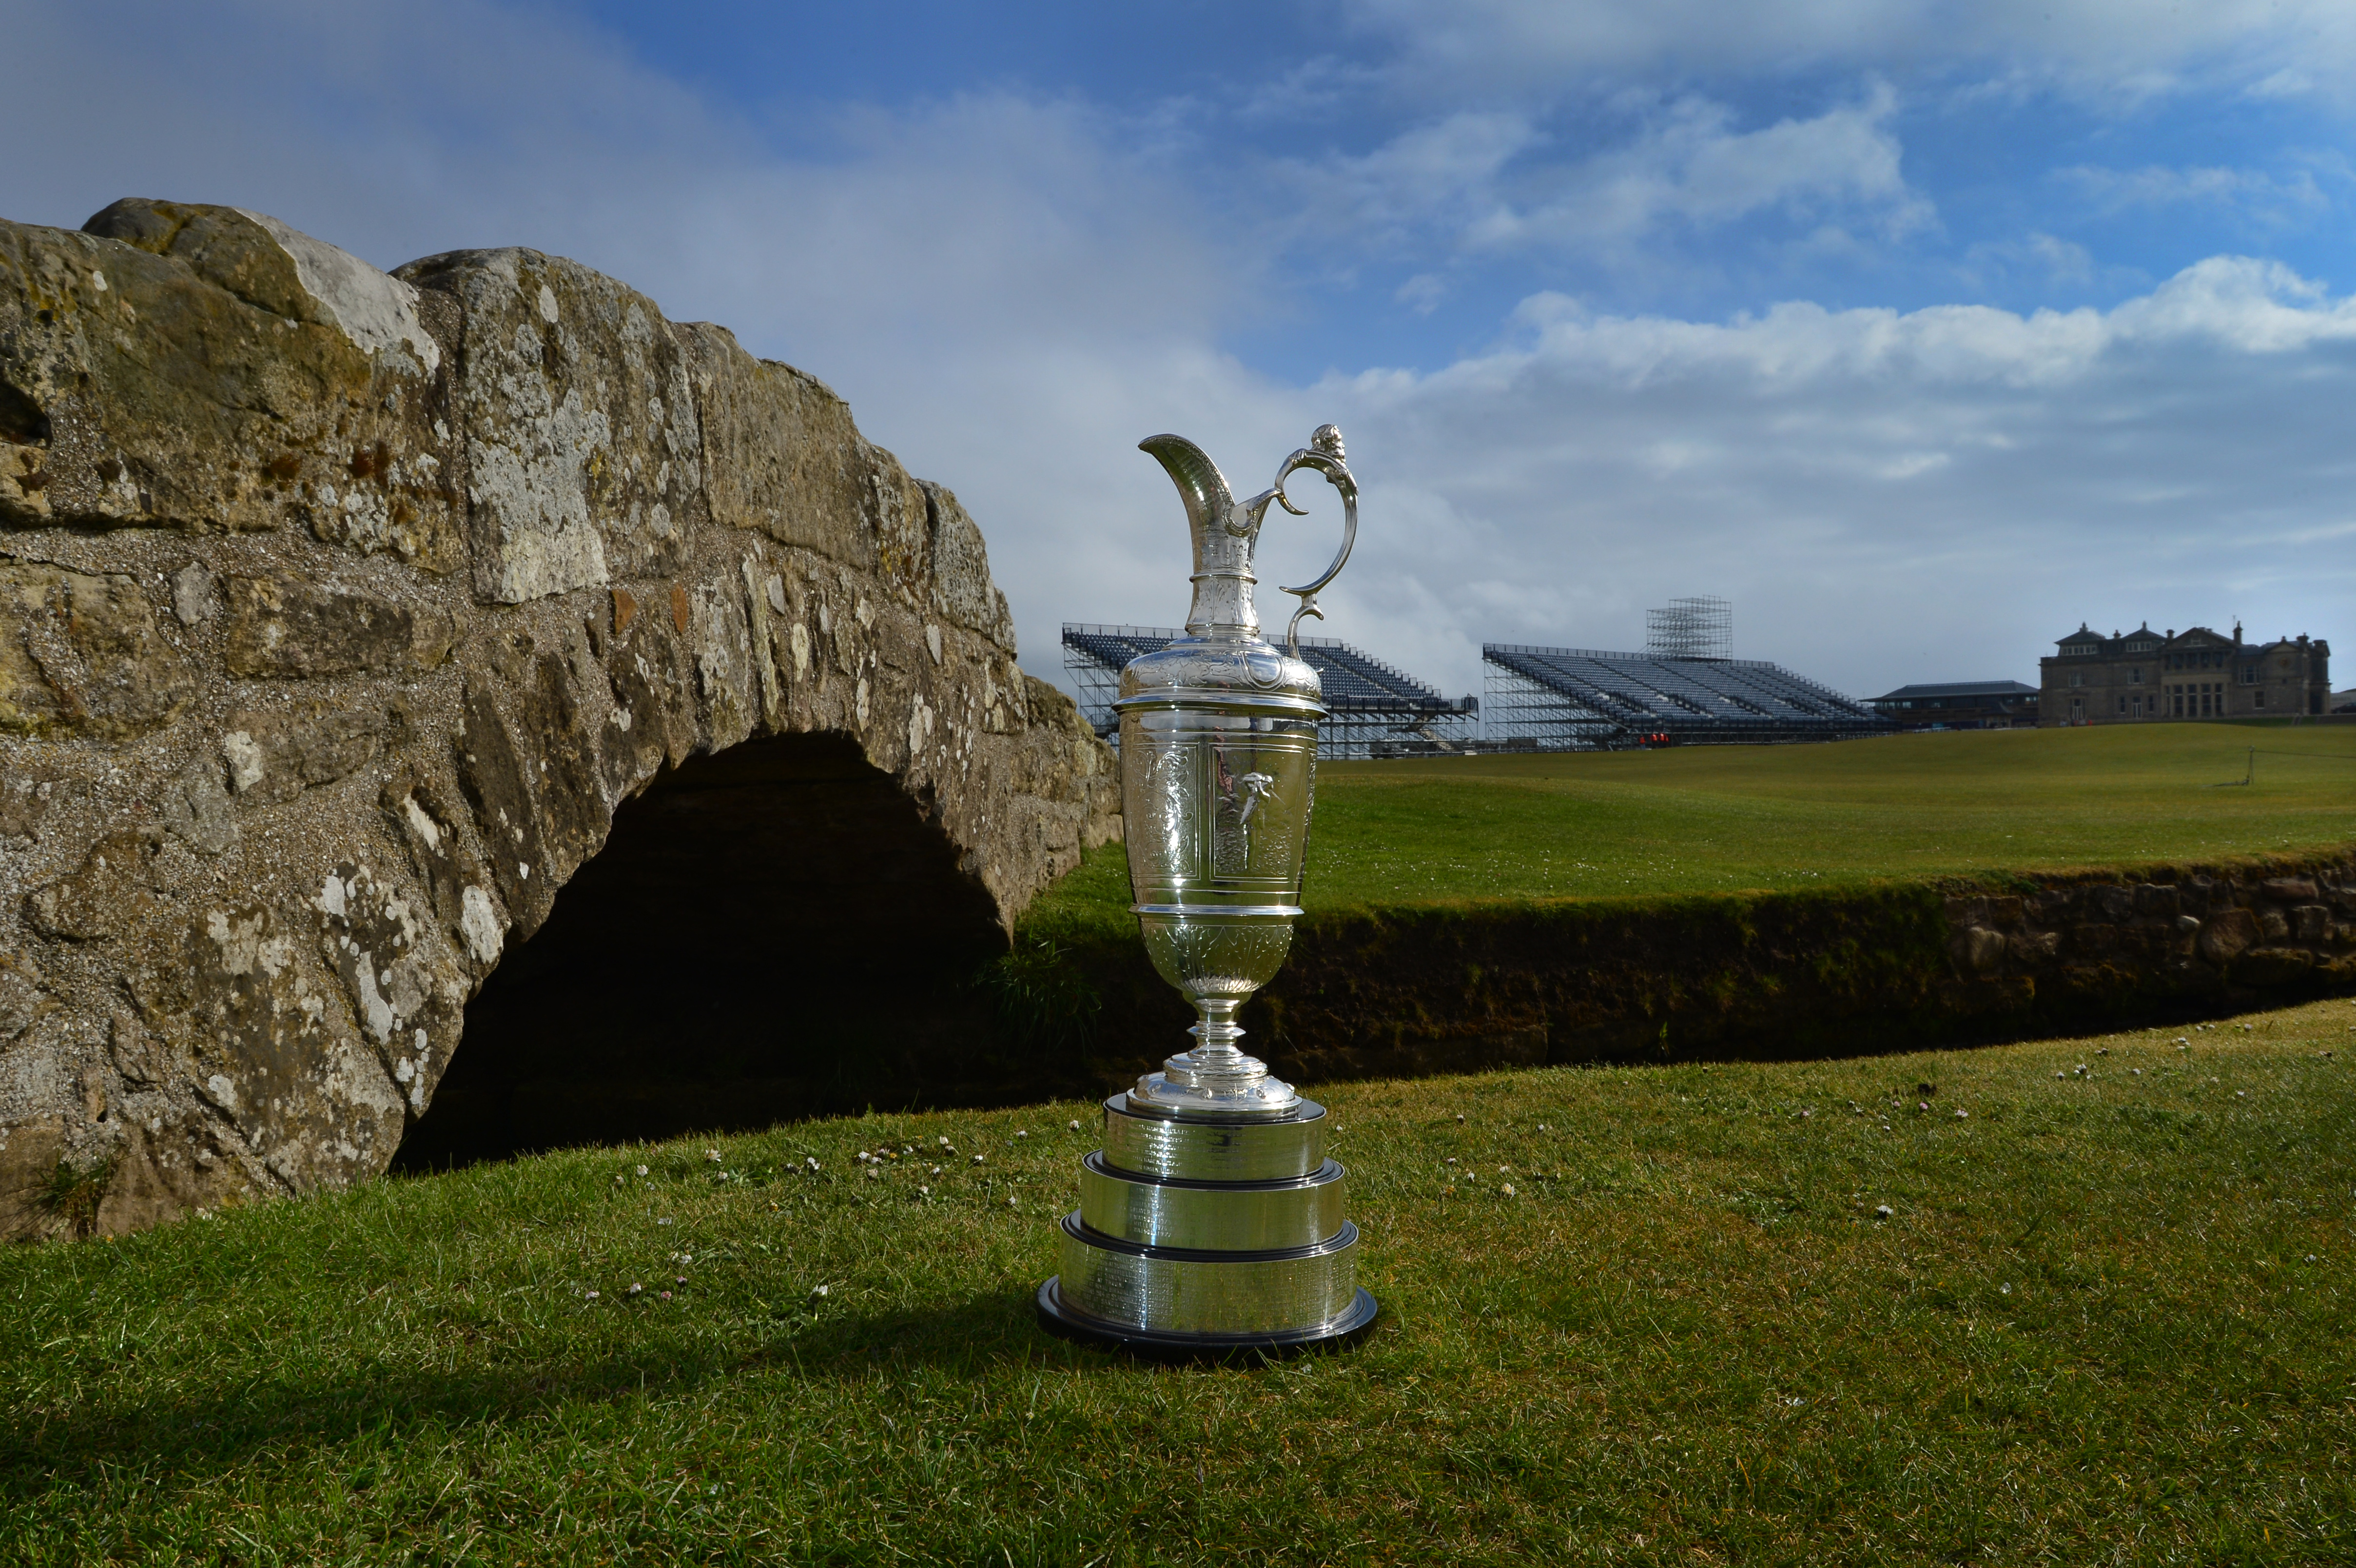 British Open 2021 FREE LIVE STREAM How to watch complete coverage, tee times, channels